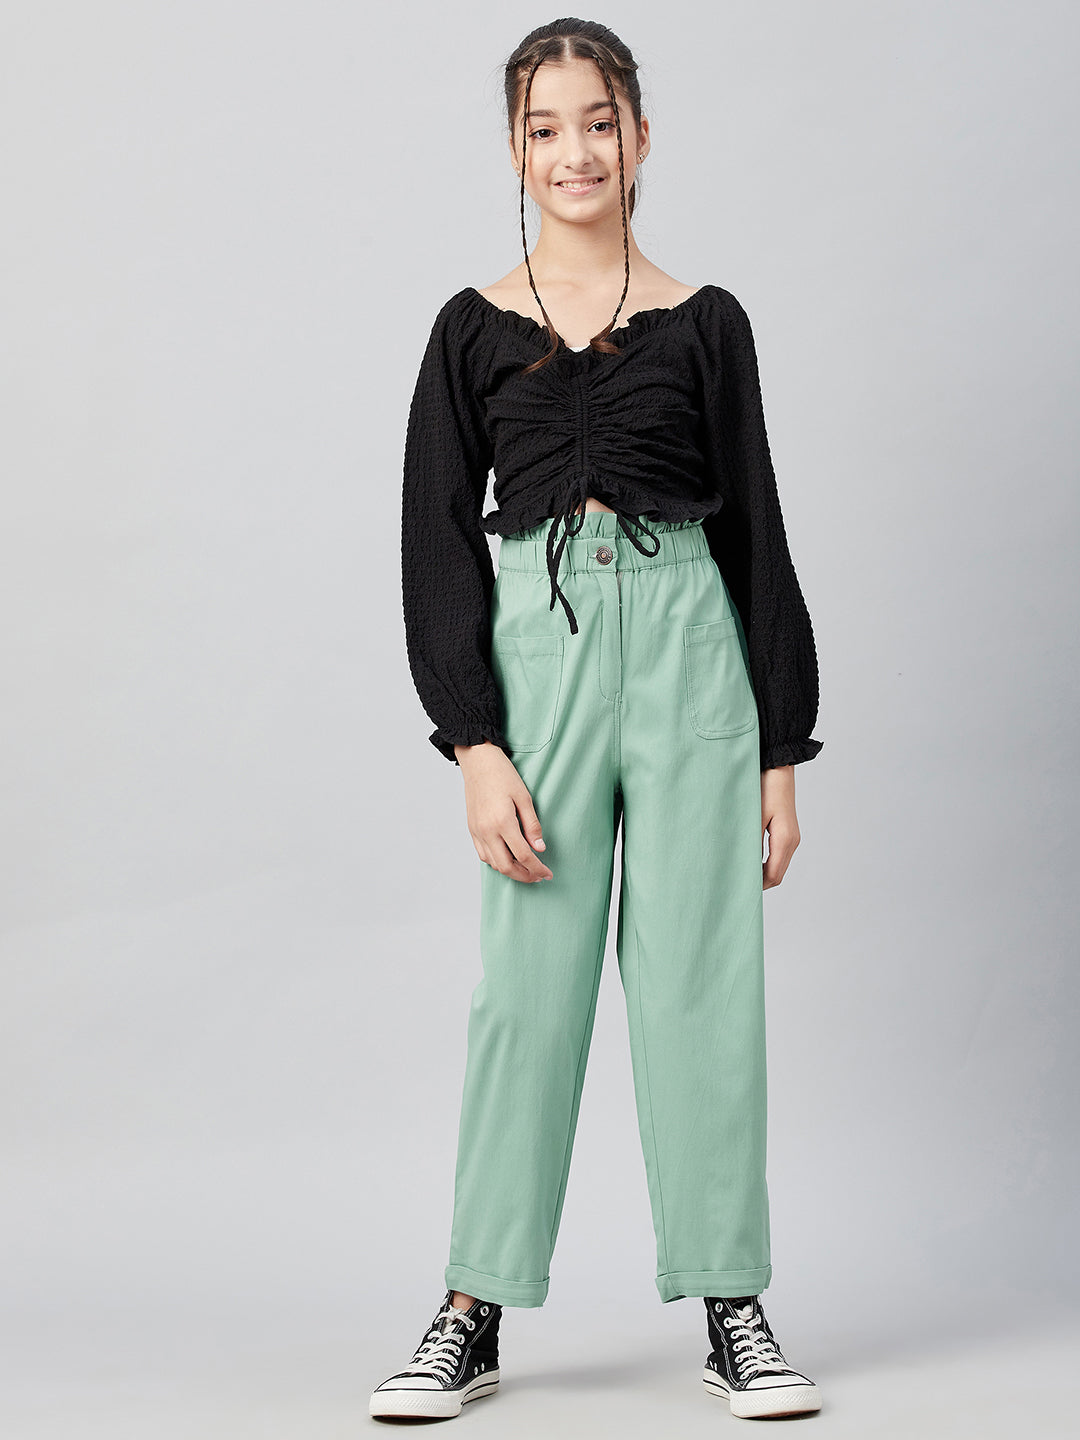 Athena Girls Green Relaxed Straight Leg Fit High-Rise Trousers - Athena Lifestyle